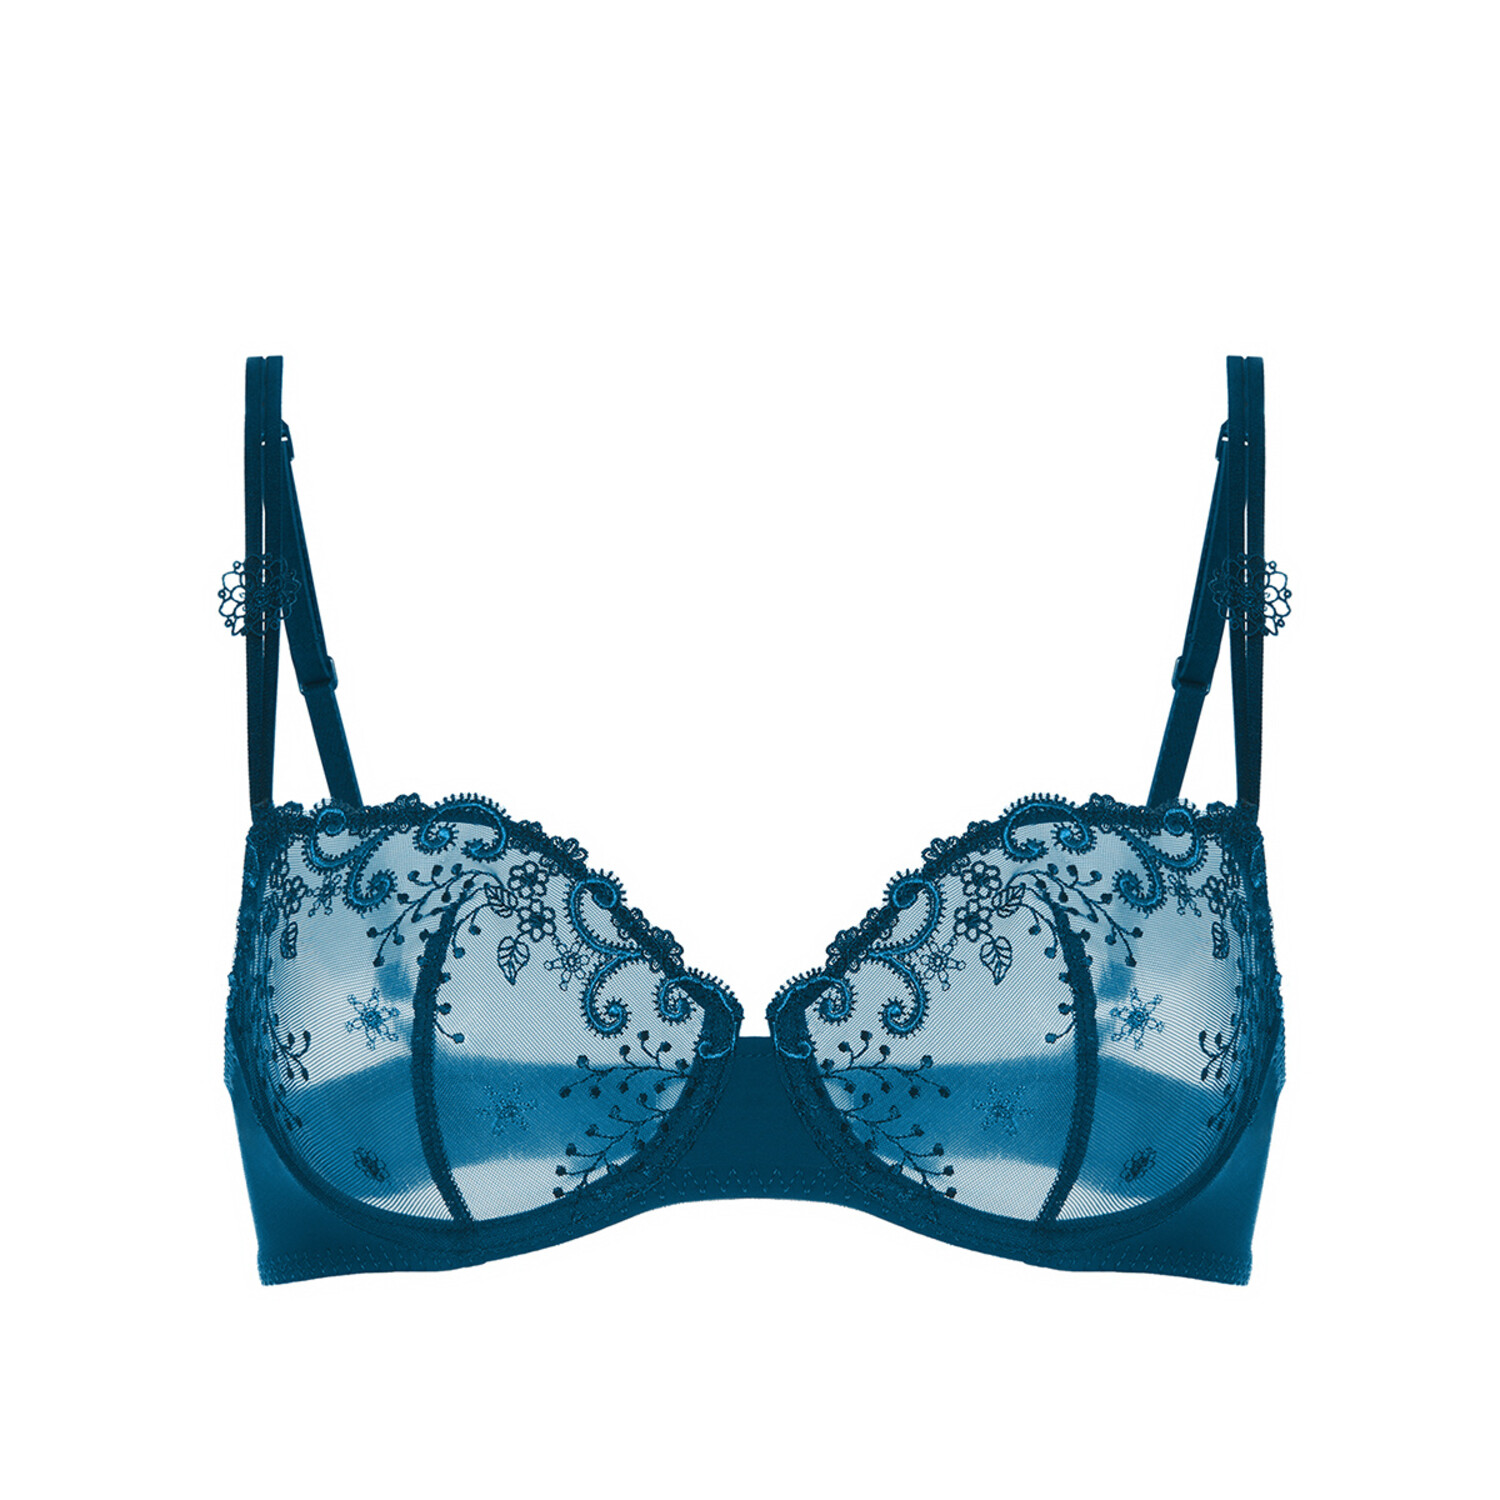 Womens Push Up Bra Teal Blue Lace Multiple Sizes Brand New!